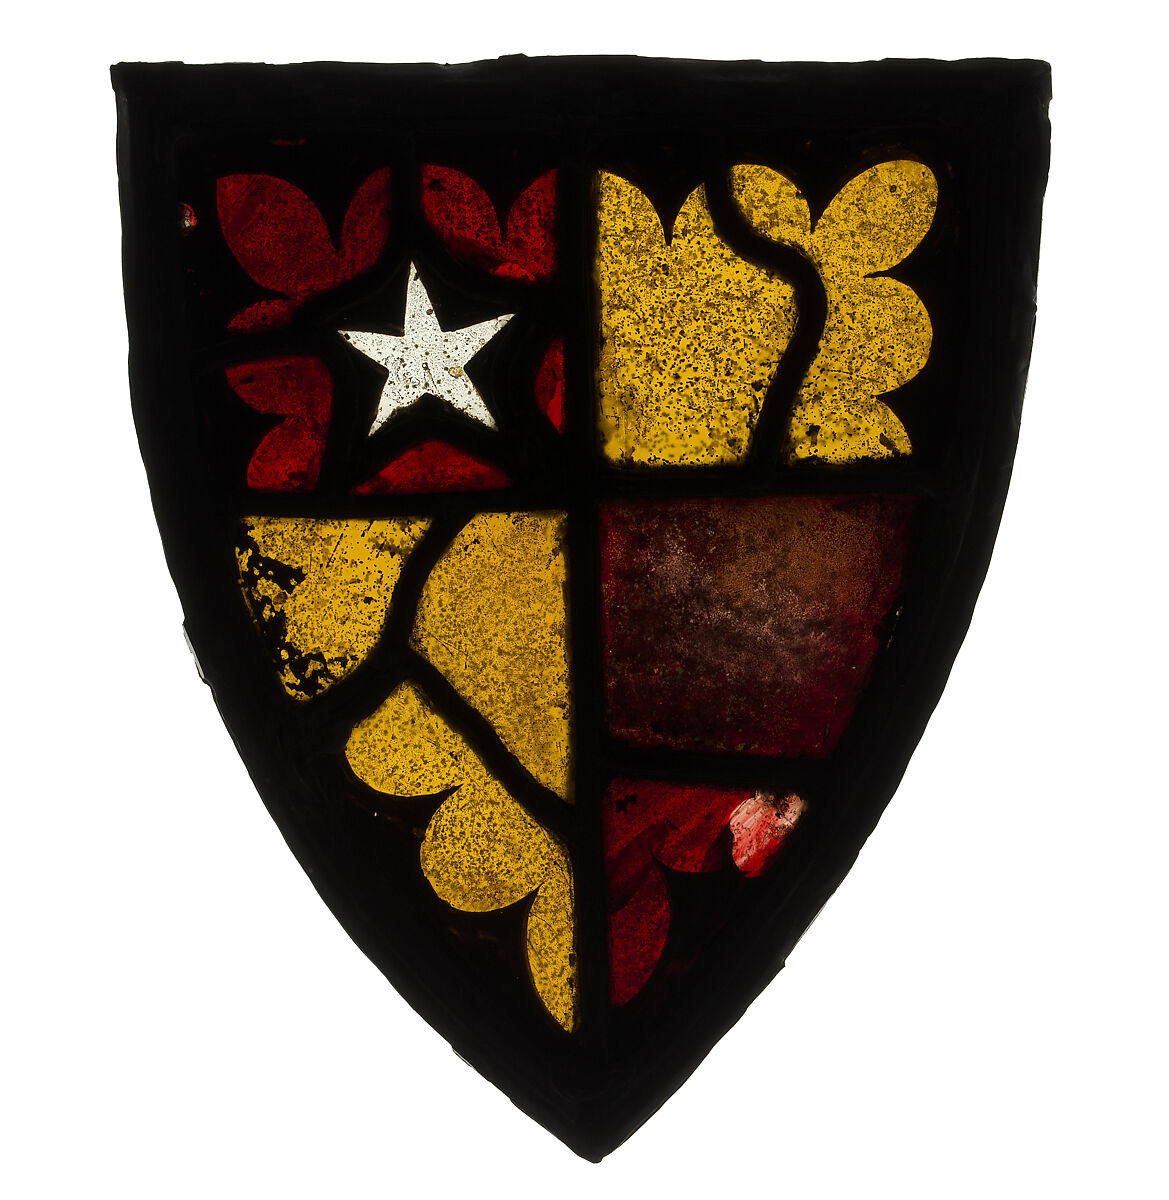 Panel with Heraldic Shield, Stained glass, British 